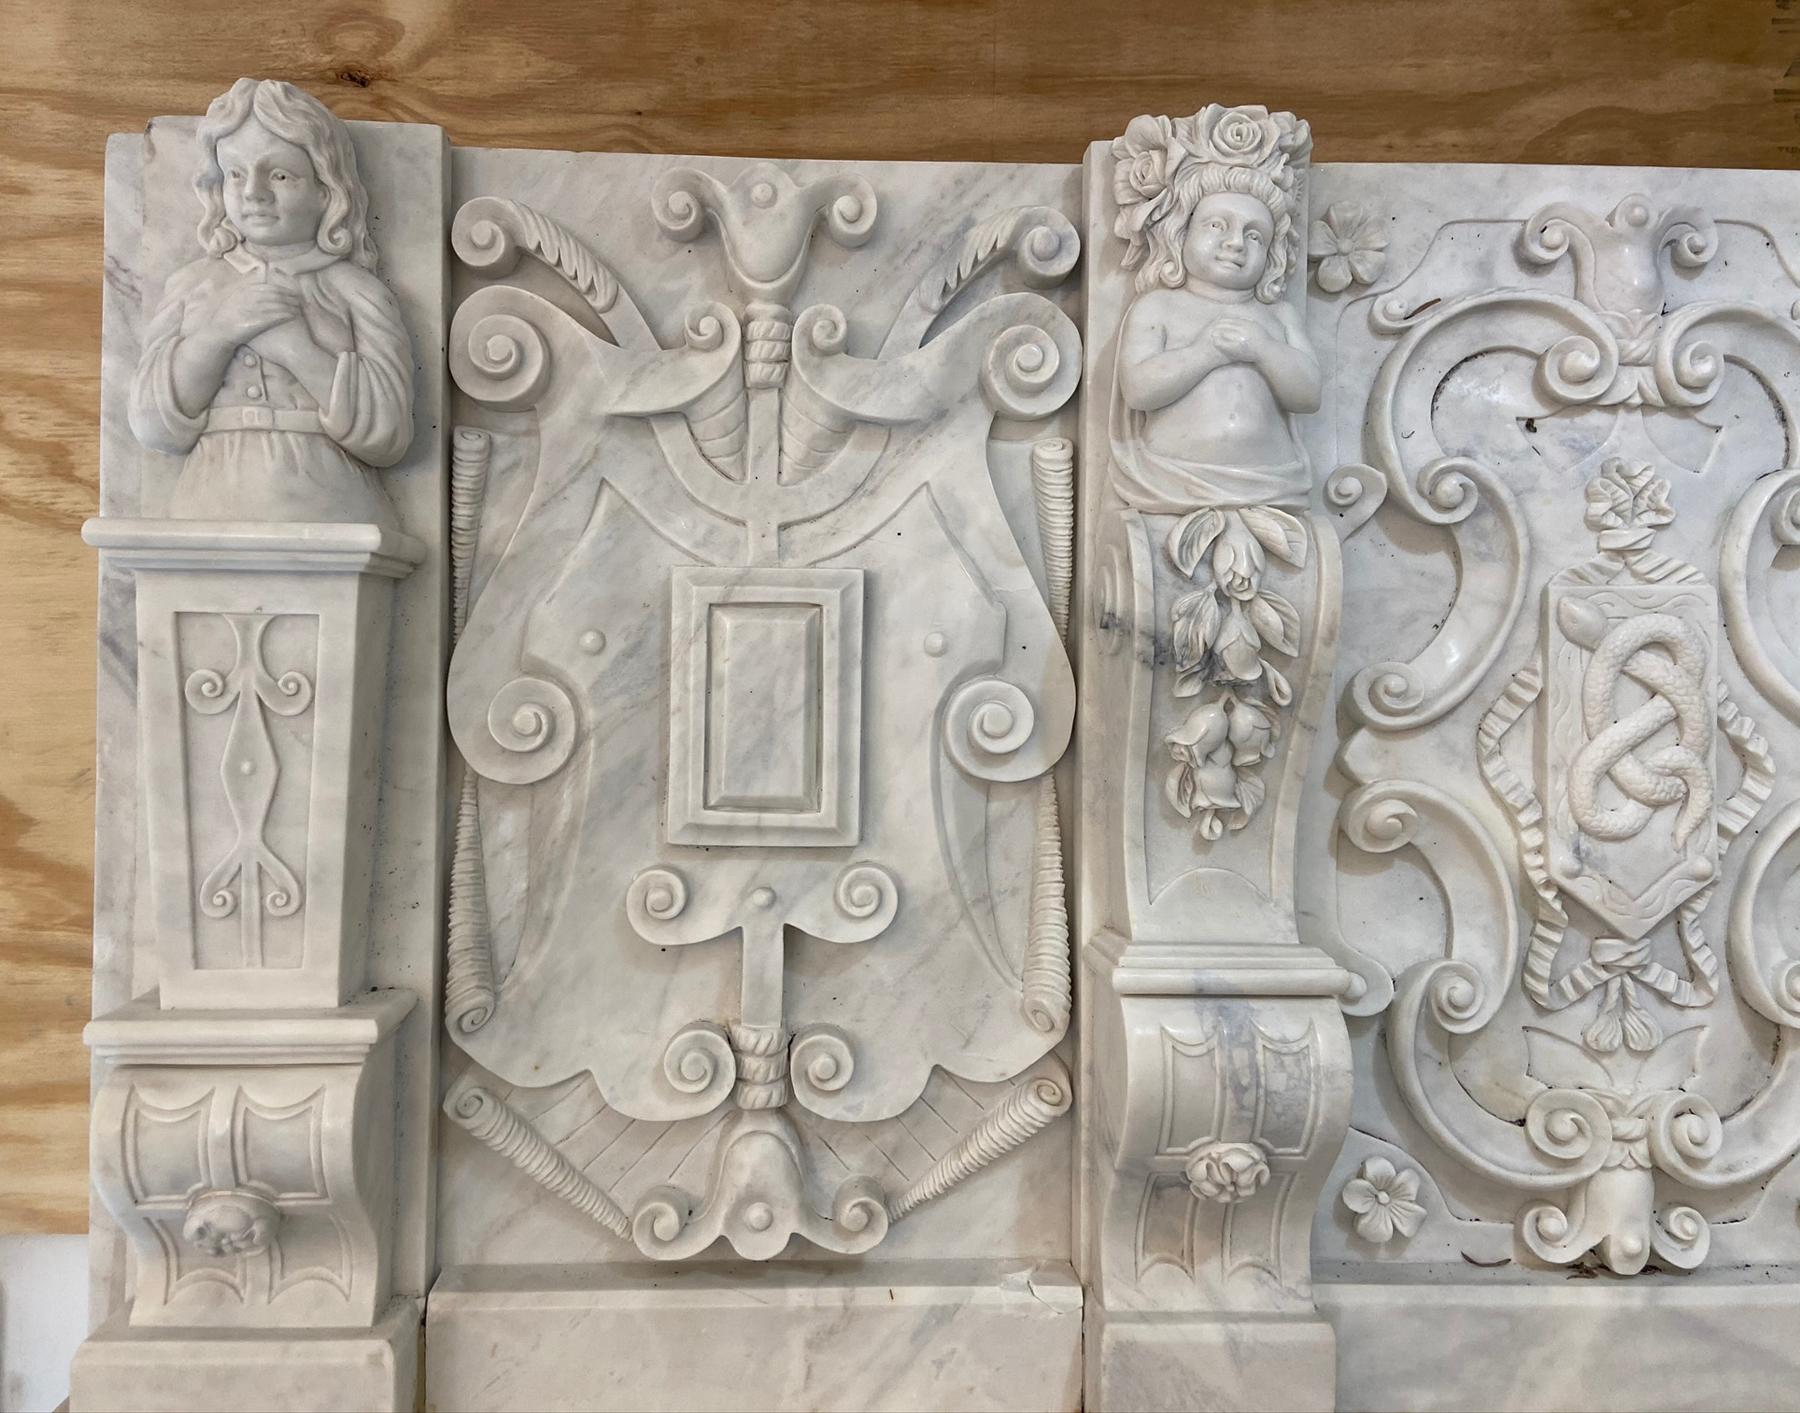 About nine feet tall a beautifully carved marble mantle piece. Very nicely veined Italian marble. This is truly impressive mantle that is meant to be built in. approximately 86 inches wide by 119 inches tall the opening is 40 wide by 36 inches high.